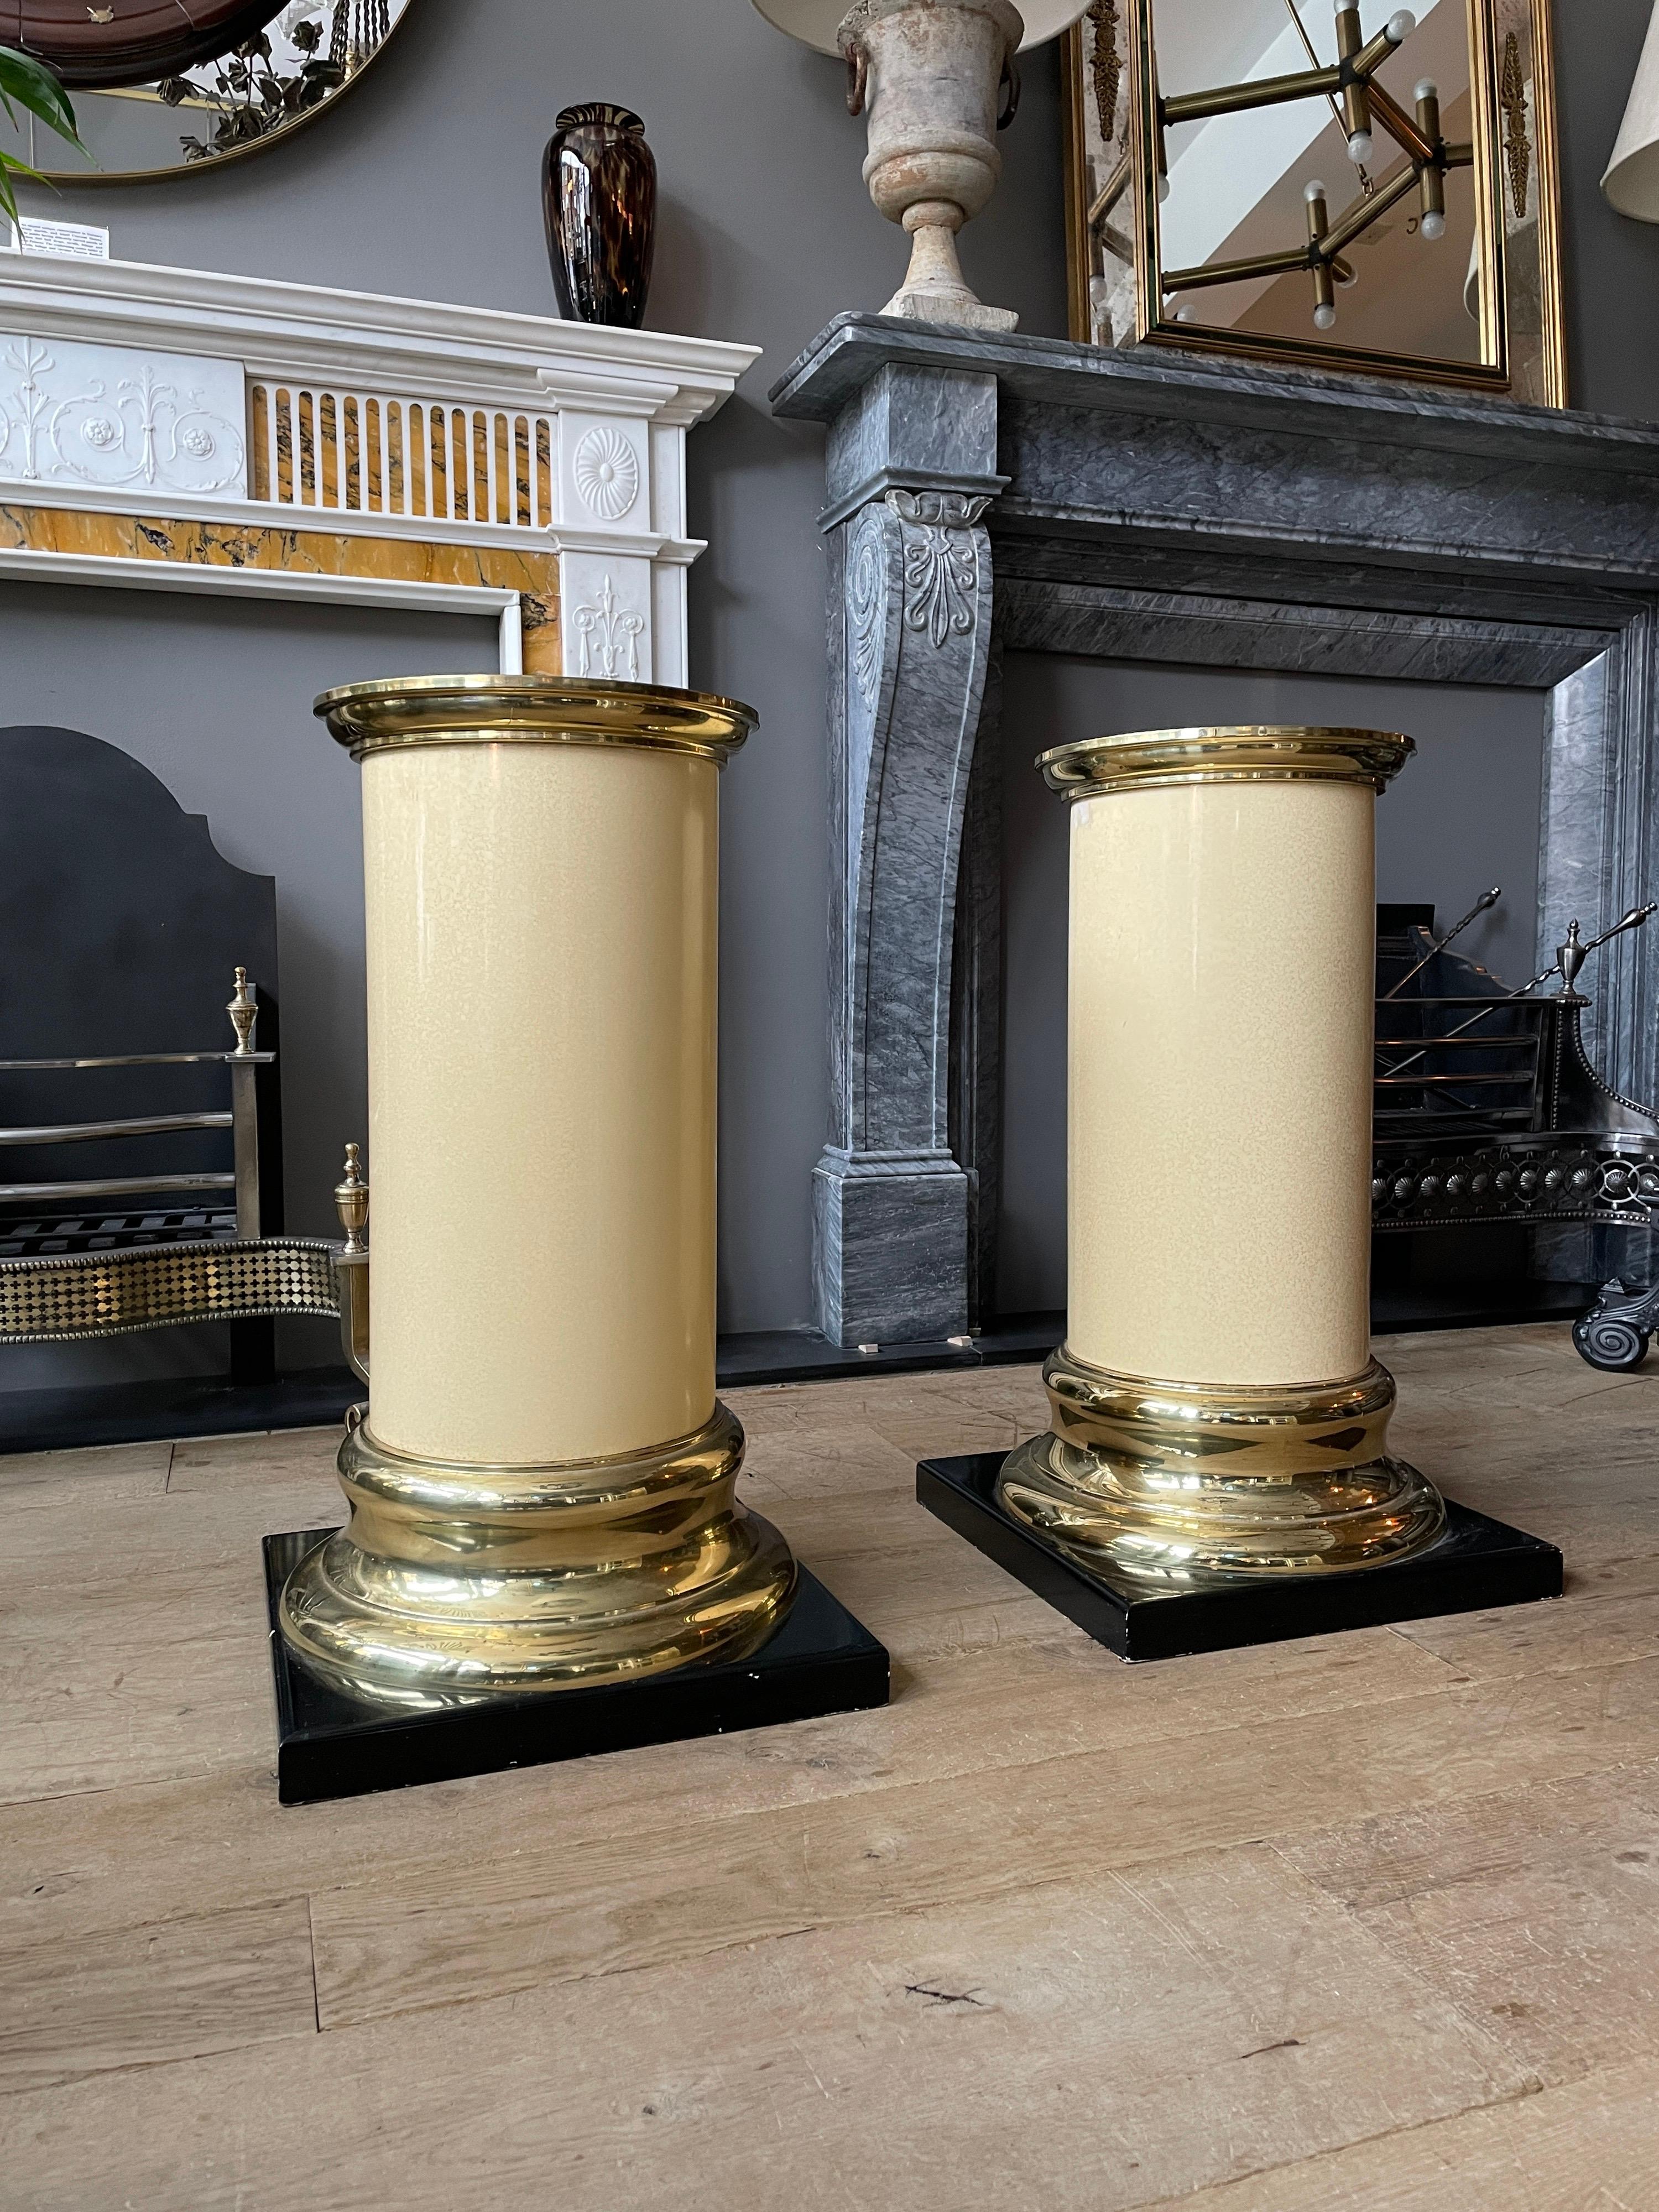 A late 20th century pair of pedestals with ebonized bases brass soccles and capitals with cream lacquered plinths. American circa 1970 by Mastercraft.